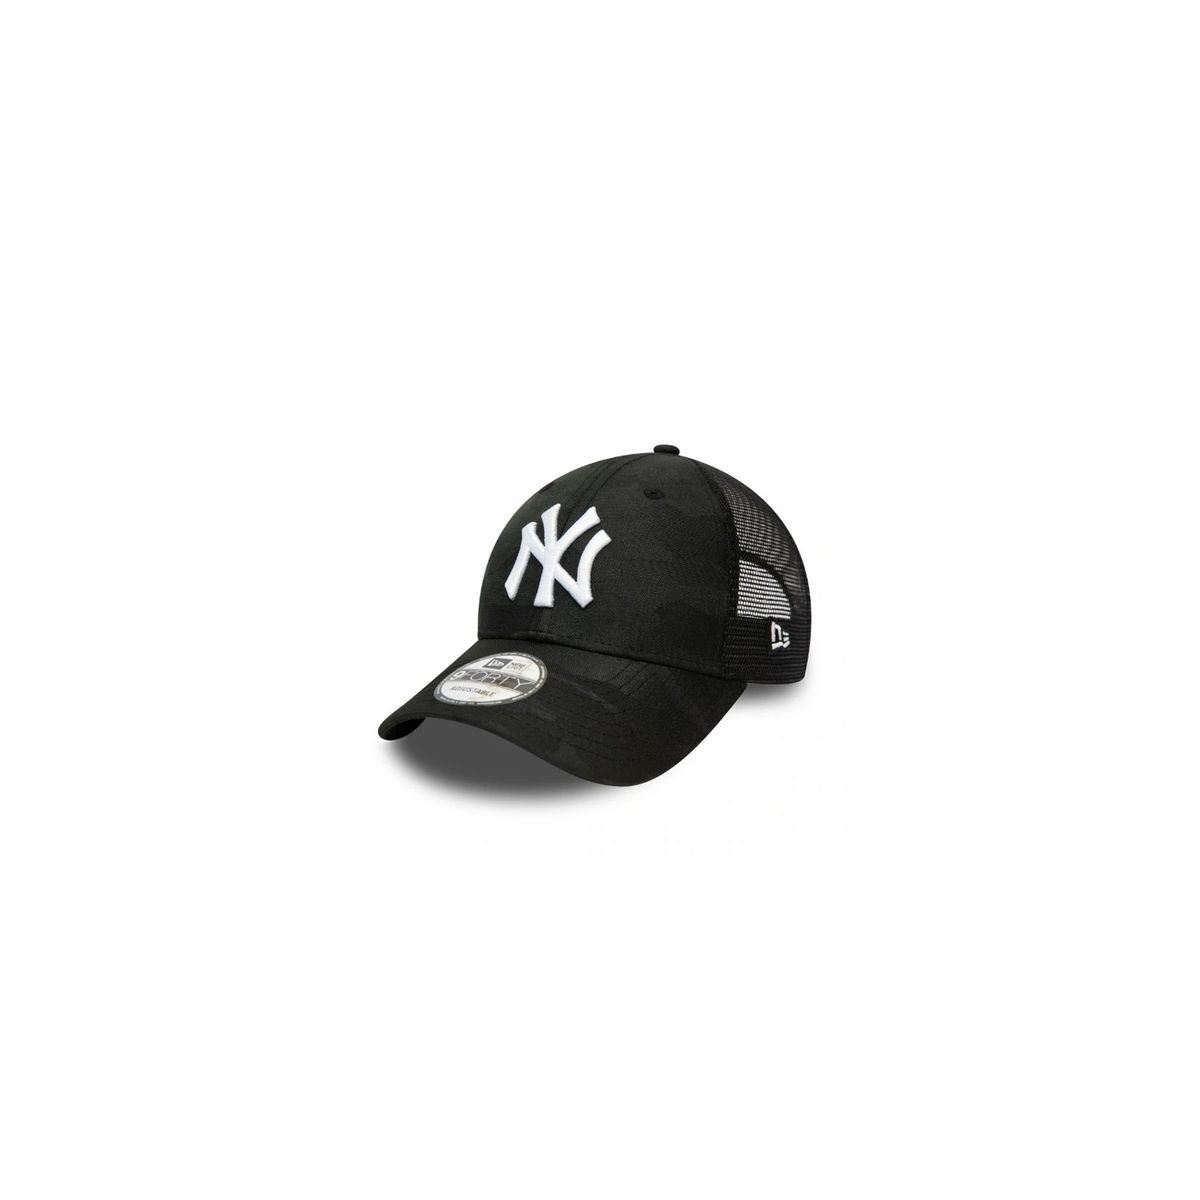 Try out punishment straw Casquette new york enfant | La Redoute